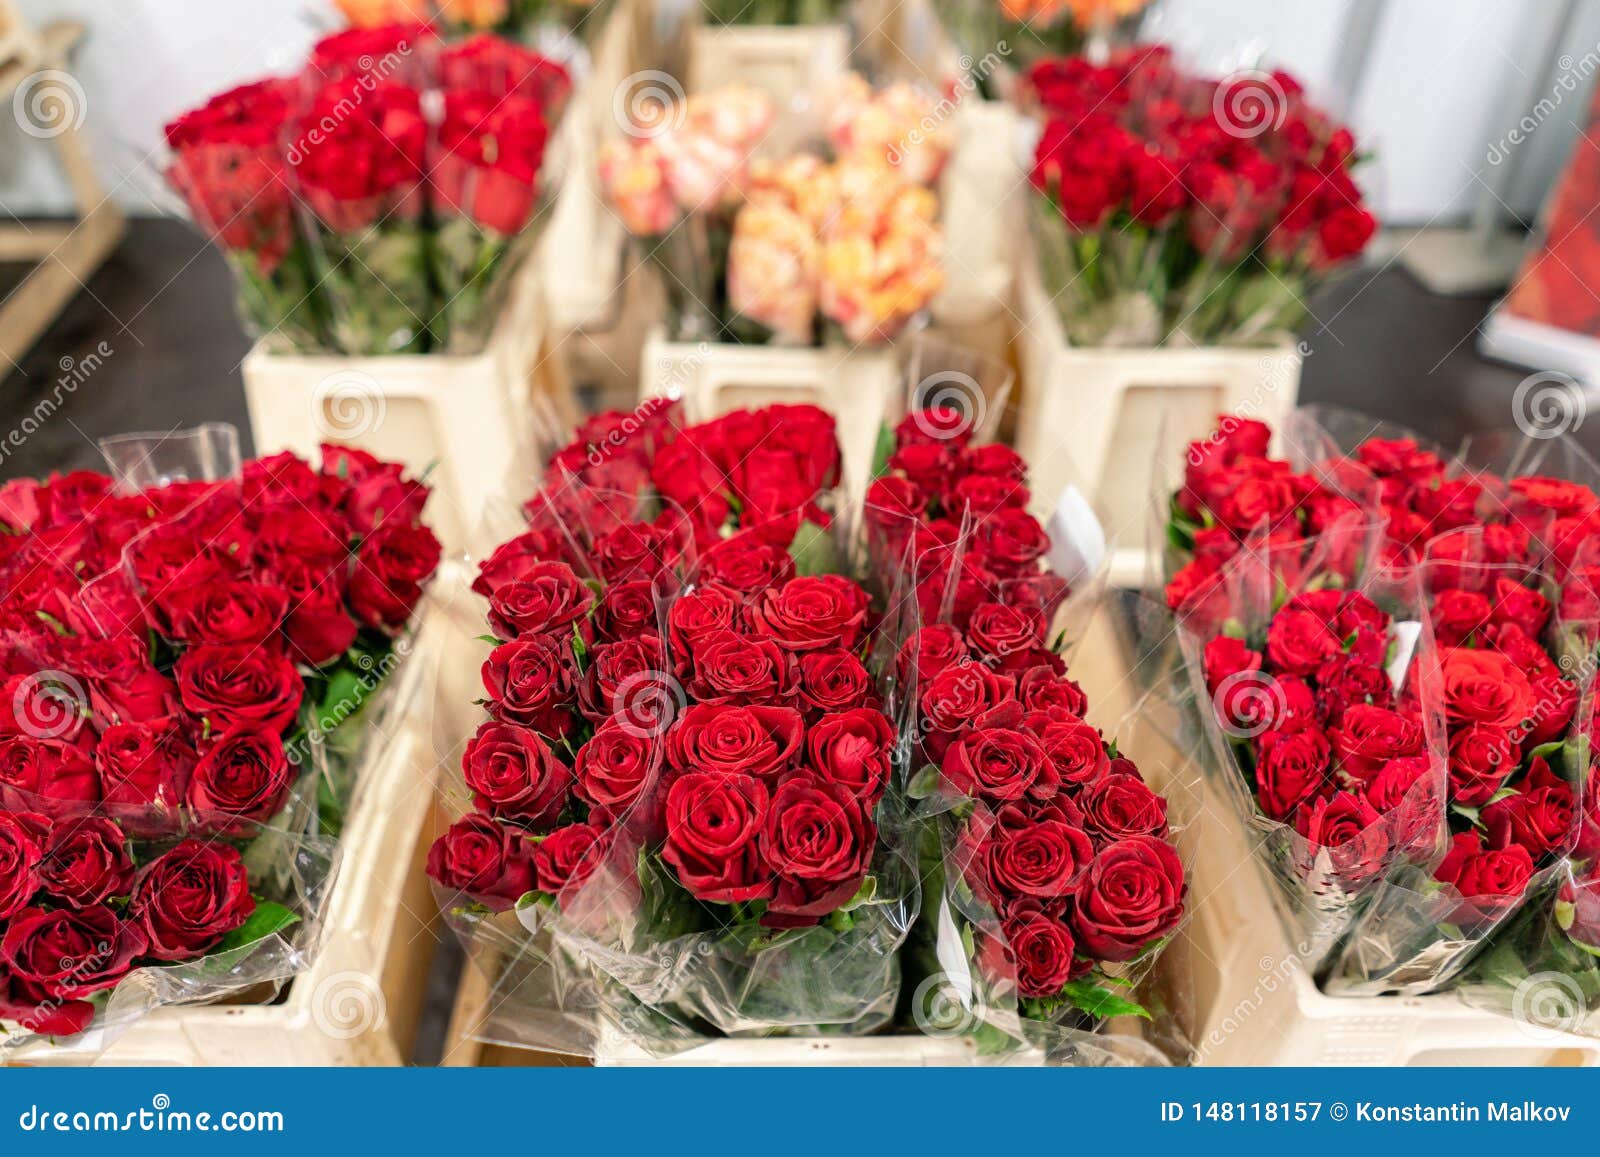 Warehouse Refrigerator, Wholesale Flowers for Flower Shops. Red Roses in a Plastic or Online Store Stock Image - Image of logistics, horticulture: 148118157